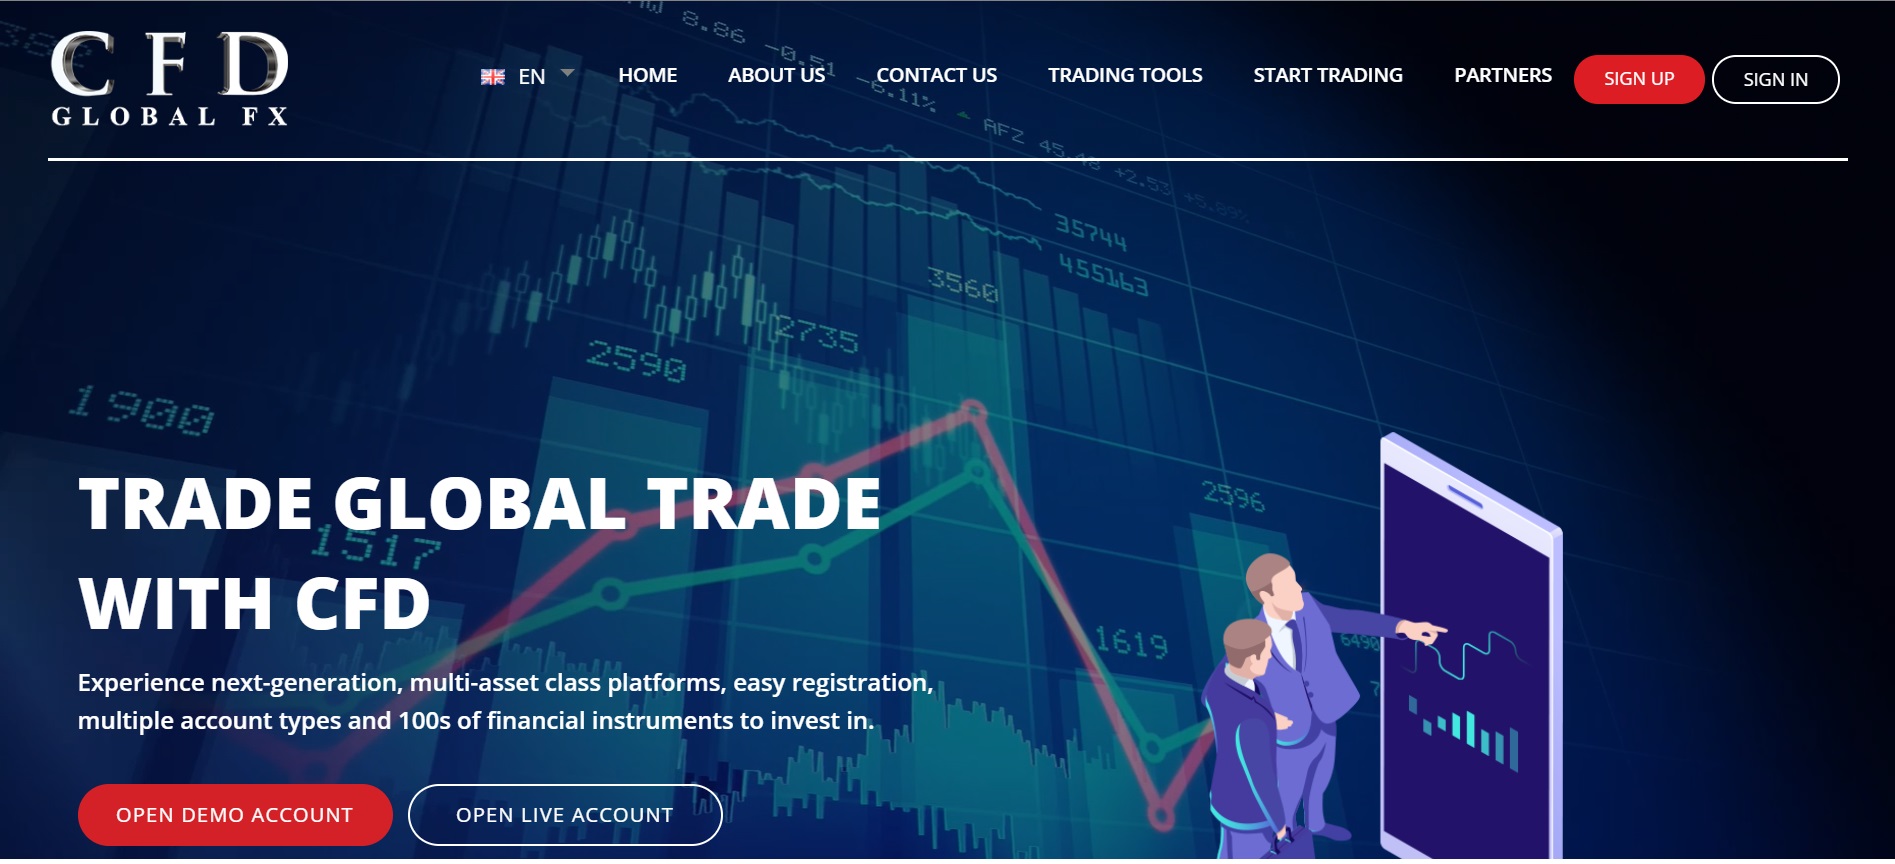 CFD Global FX Review 2020 – Can You Trust Them?